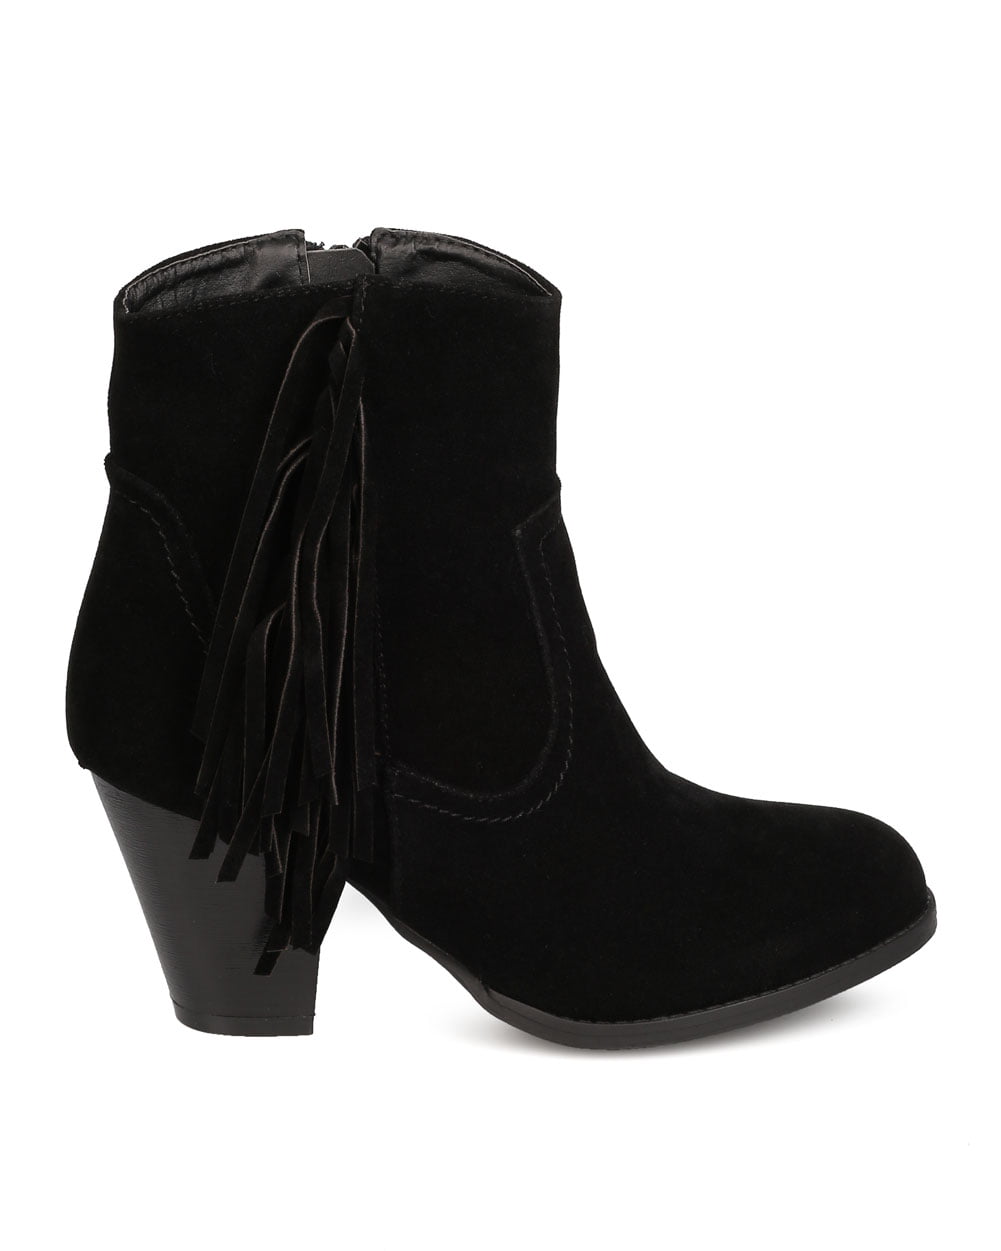 Details about   New Women Refresh Dion-02 Faux Suede Falling Fringe Chunky Heel Riding Bootie